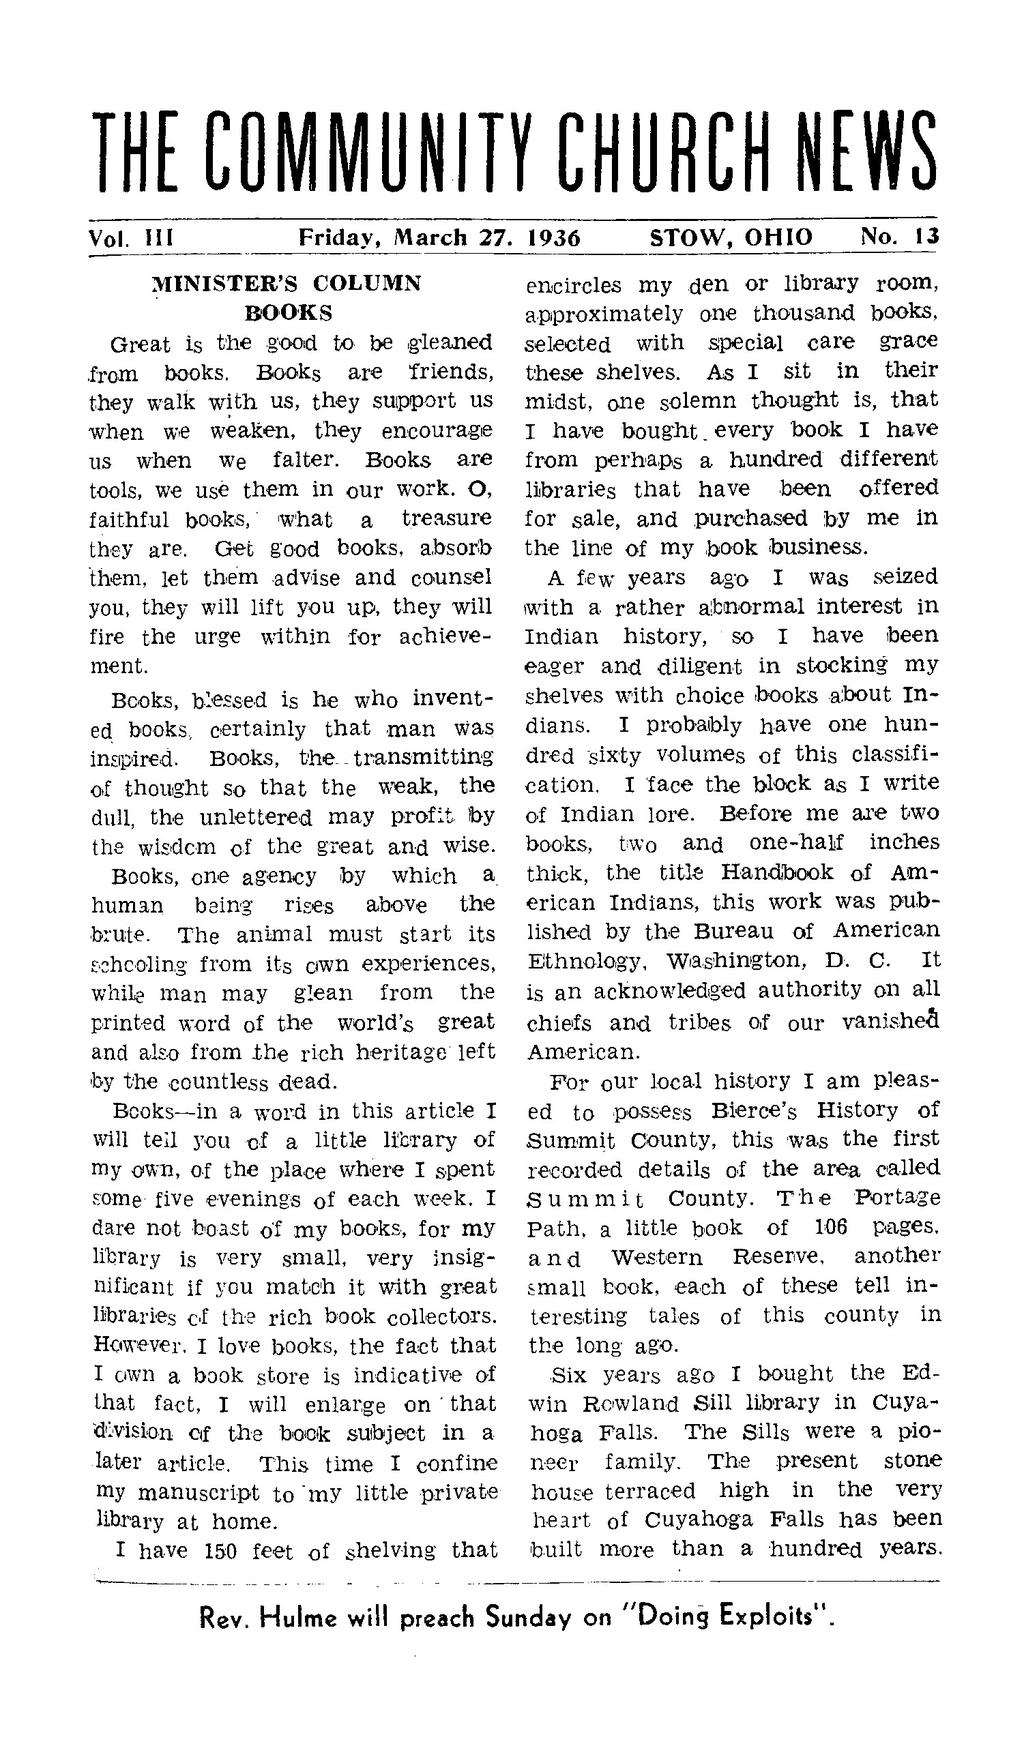 THE COMMUNITY CHURCH NEWS Vol. Ill Friday, March 27. 1936 STOW, OHIO No. 13 MINISTER'S COLUMN BOOKS Great is the good to be gleaned.from books.